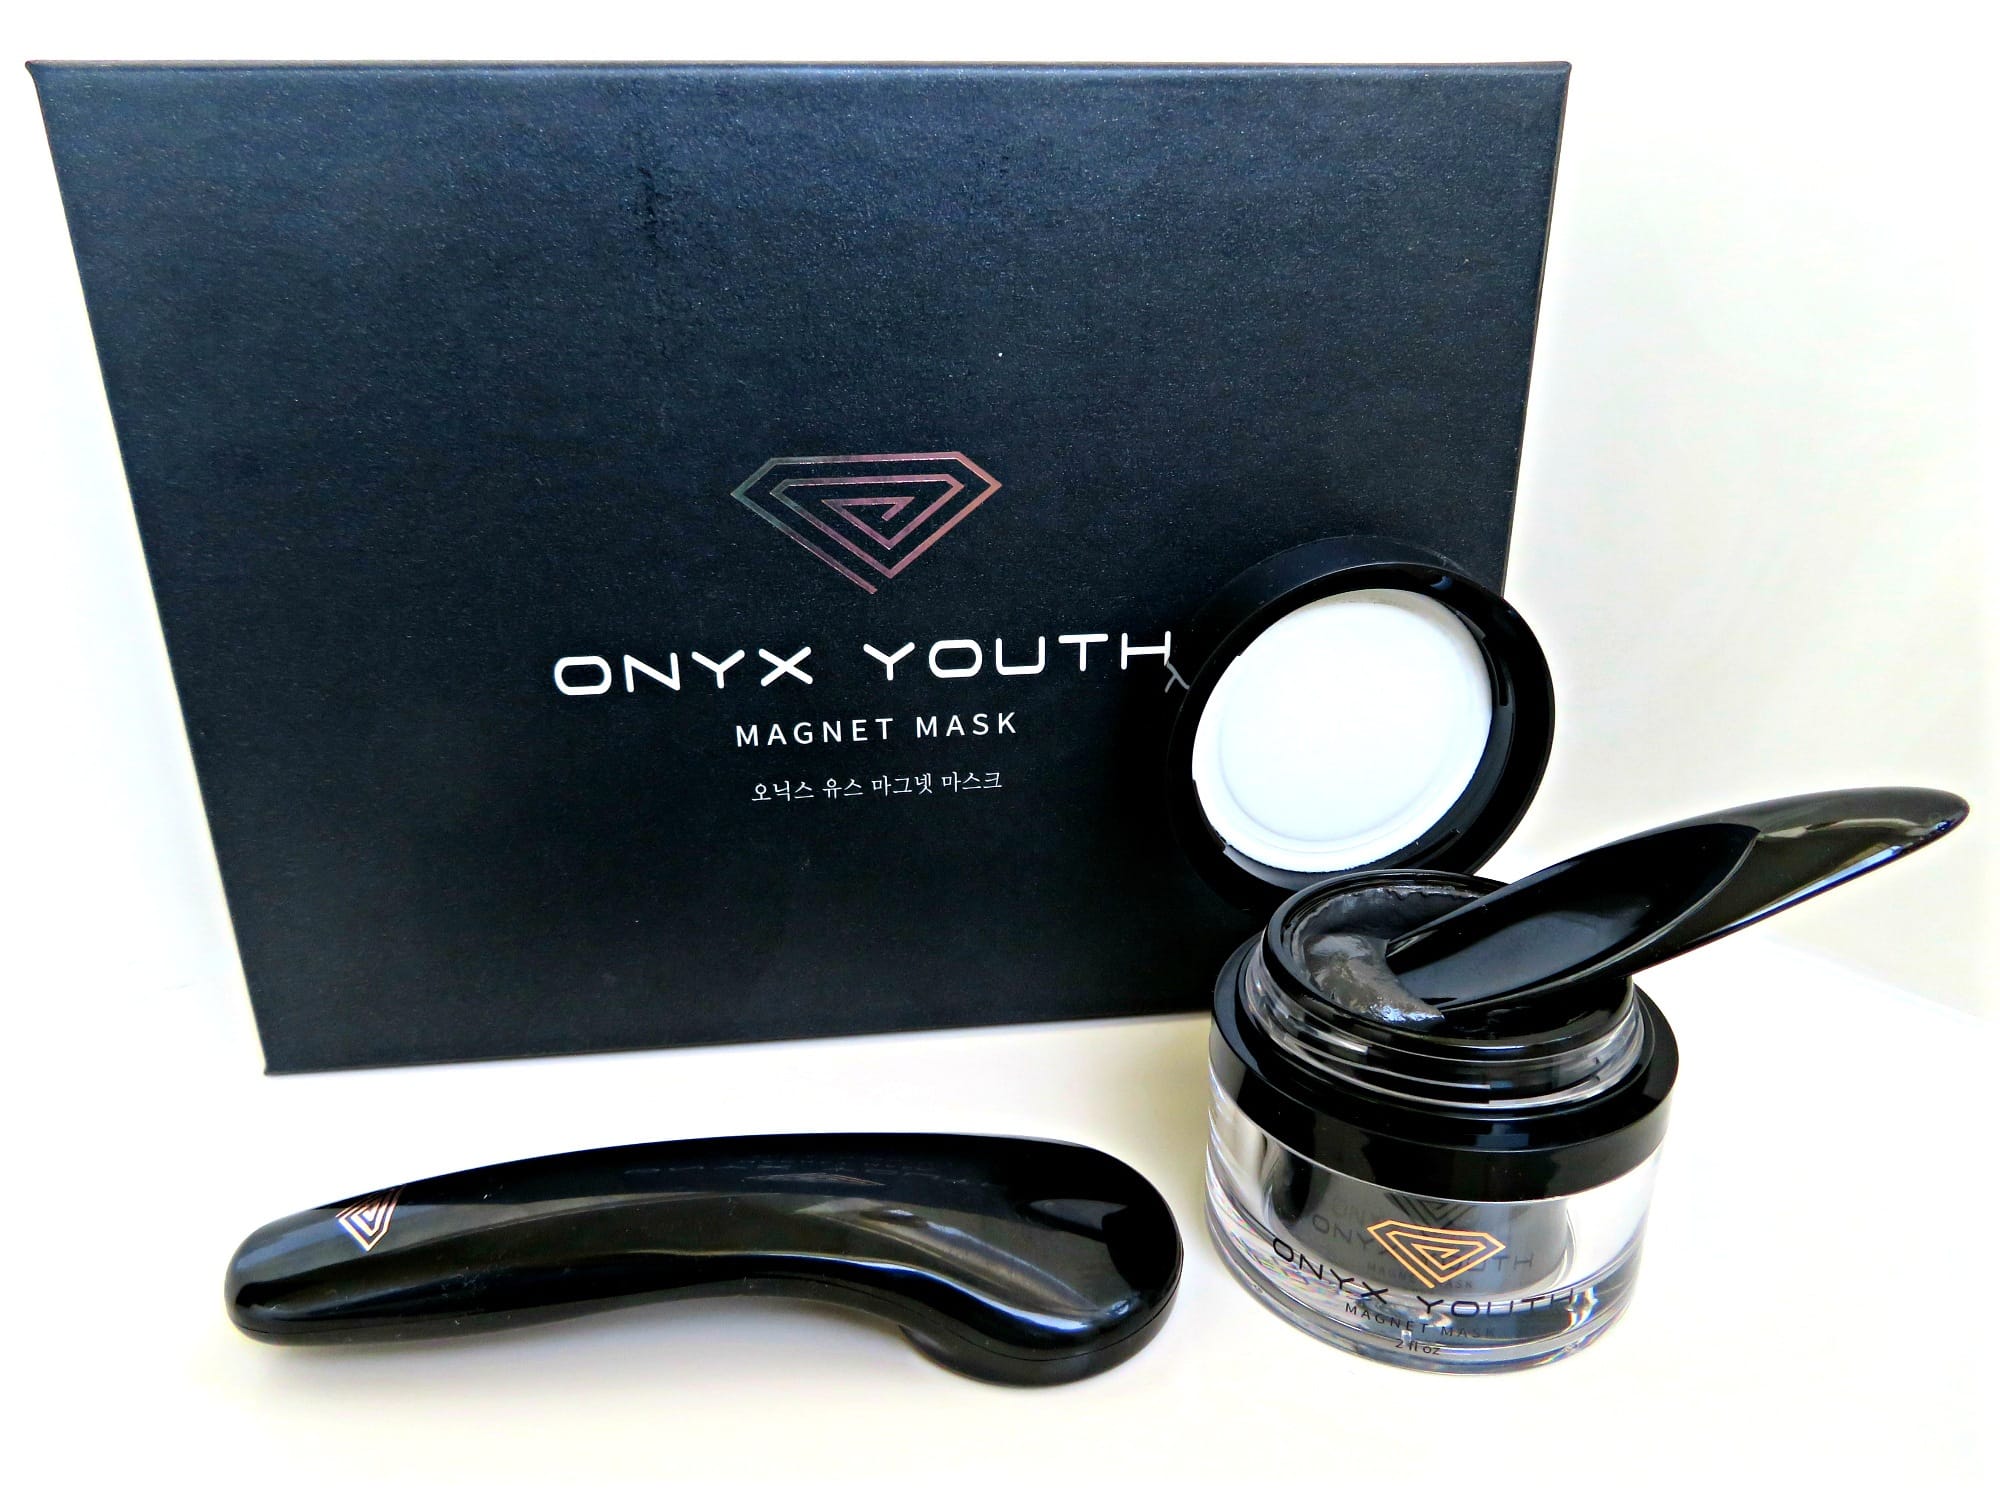 Onyx Youth magnetic mask 